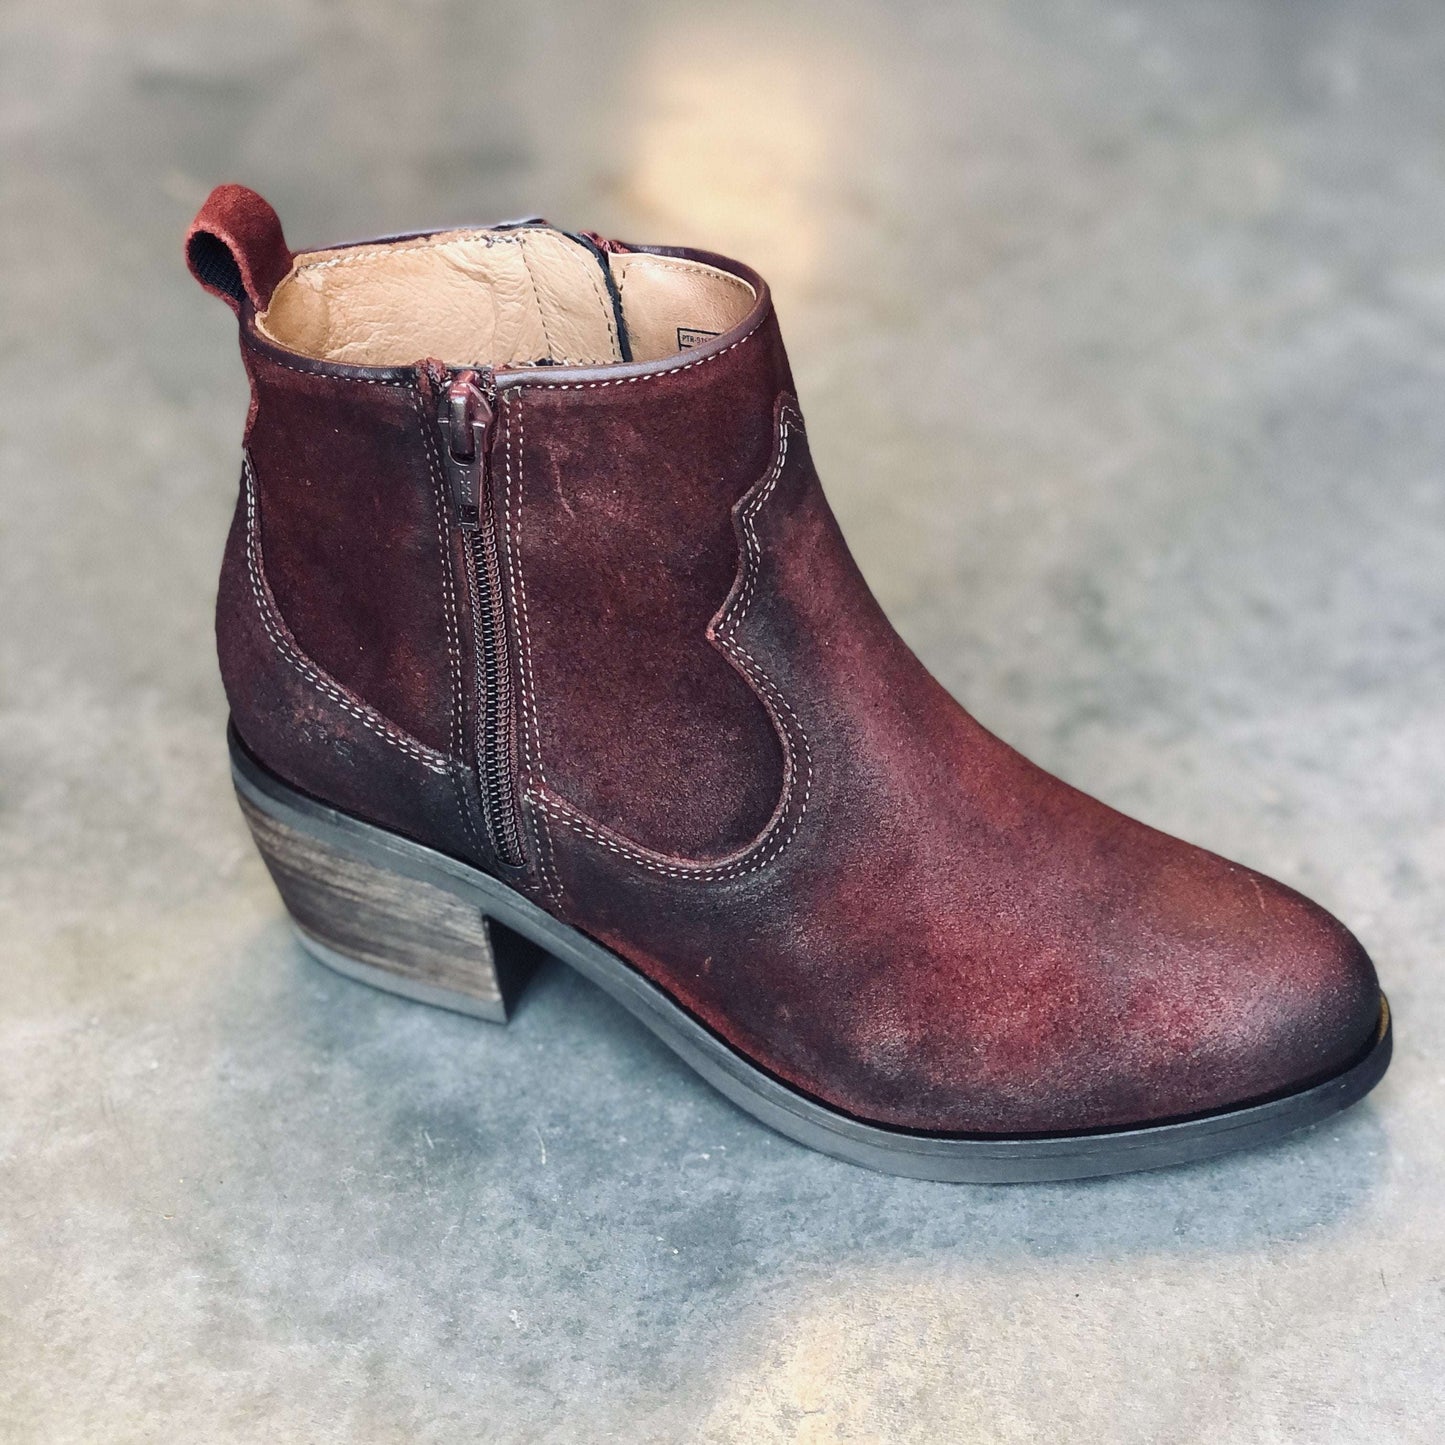 [Taos- Partner Suede Ankle Boot], [Clearance], [TAOS], [Plum Bottom].